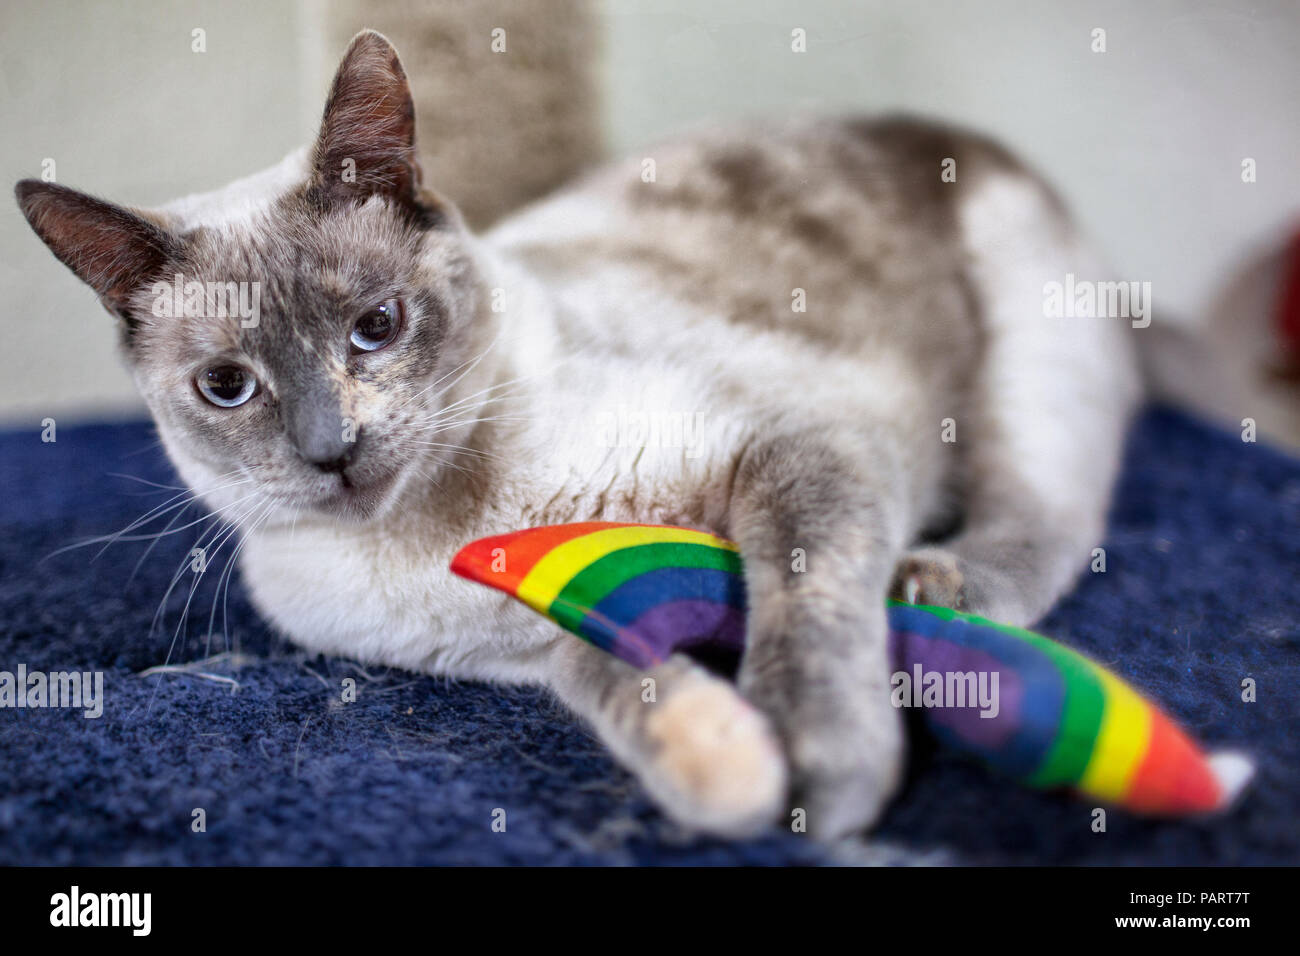 A young brown and grey Siamese domestic cat with blue eyes lying on blue carpet holding a rainbow toy Stock Photo